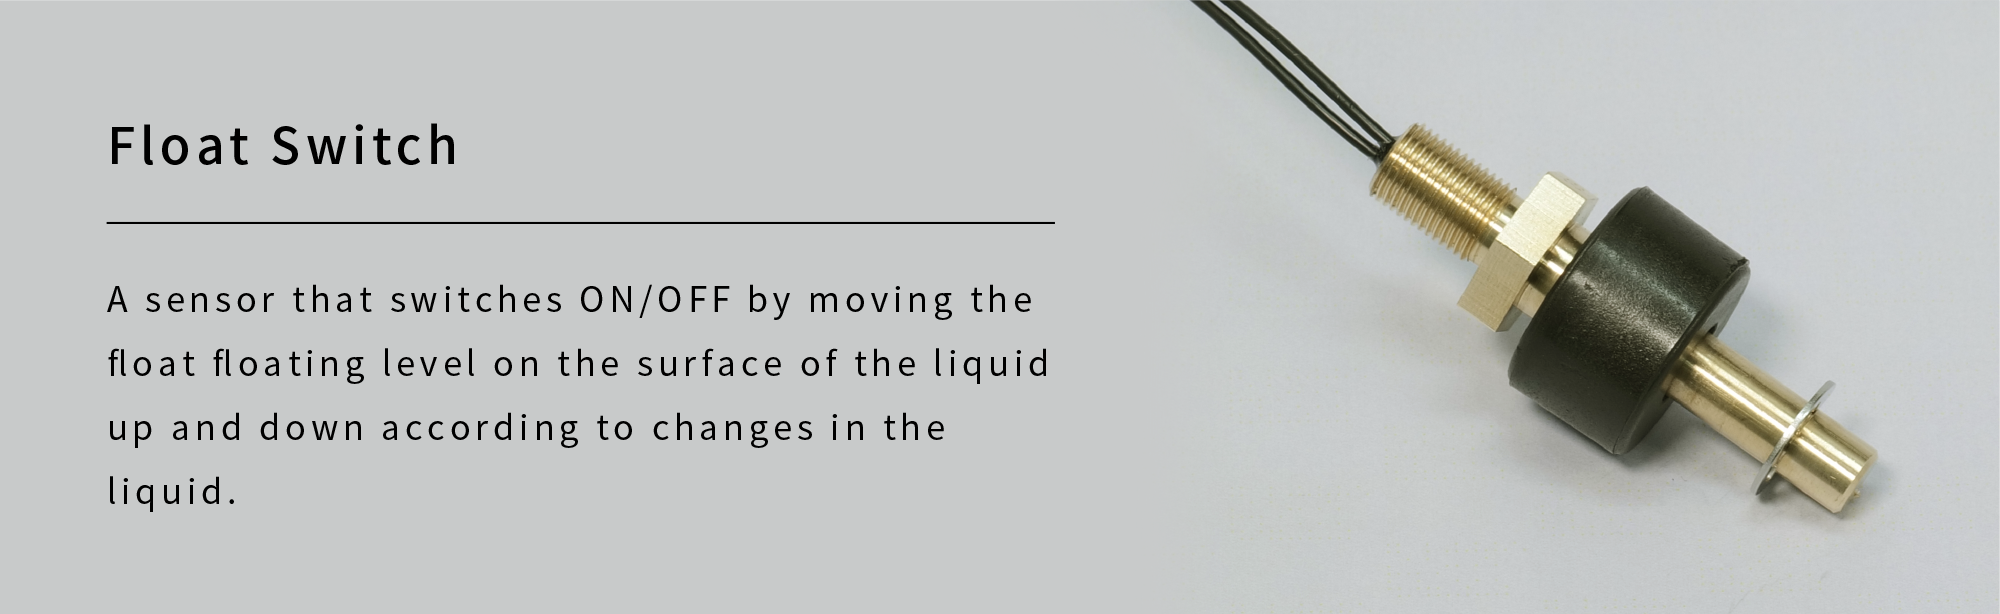 Float Switch|A sensor that switches ON/OFF by moving the float floating level on the surface of the liquid up and down according to changes in the liquid.